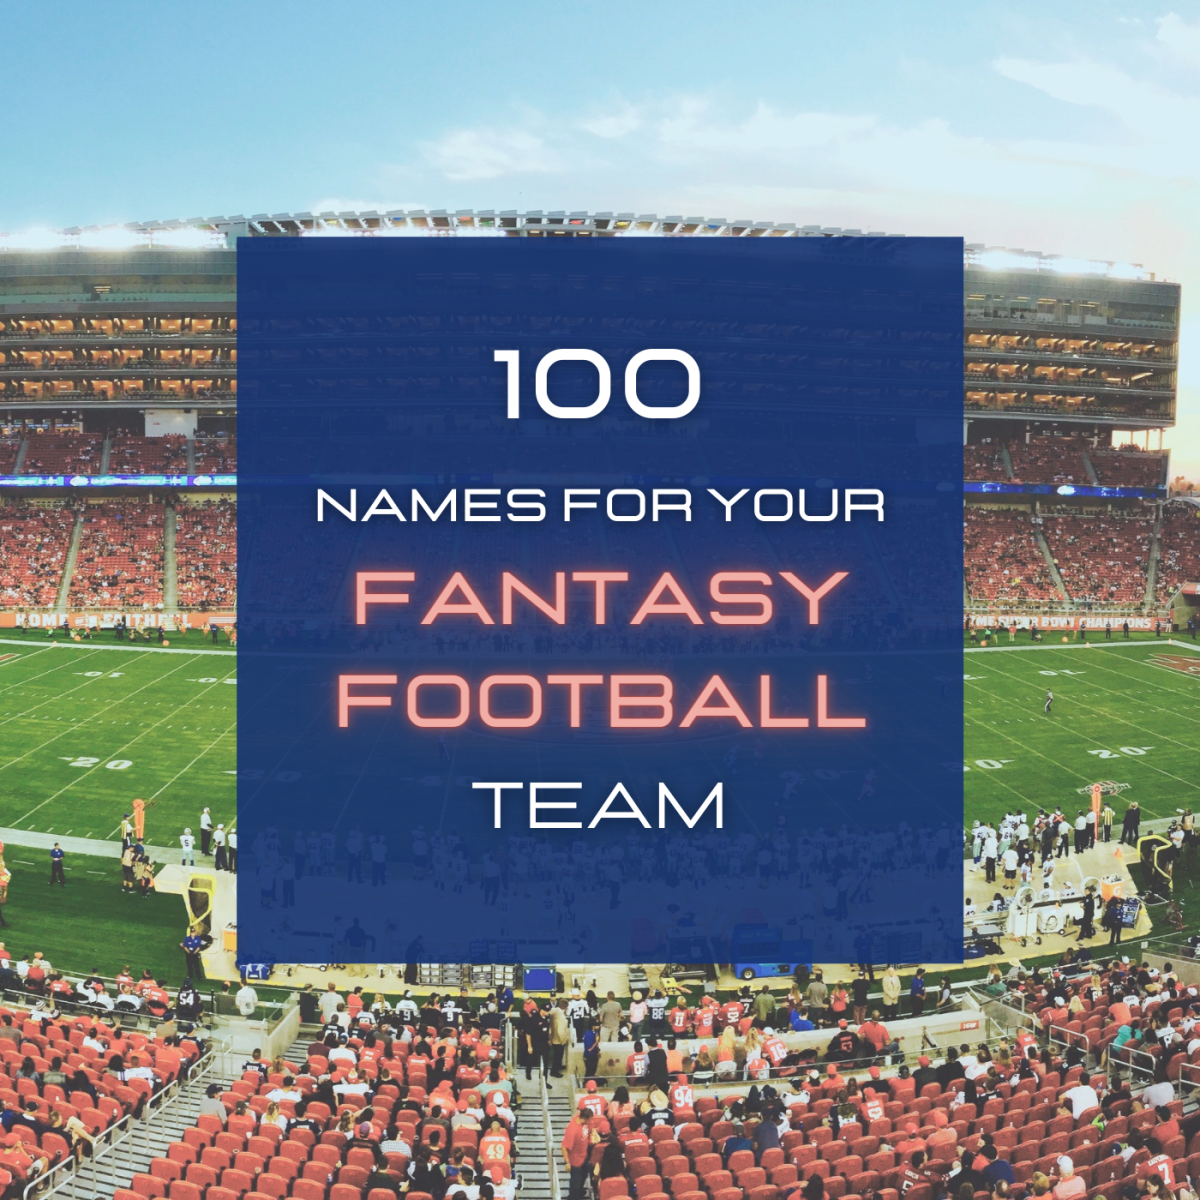 100 funny, creative, and clever names to use for your Fantasy Football team. 